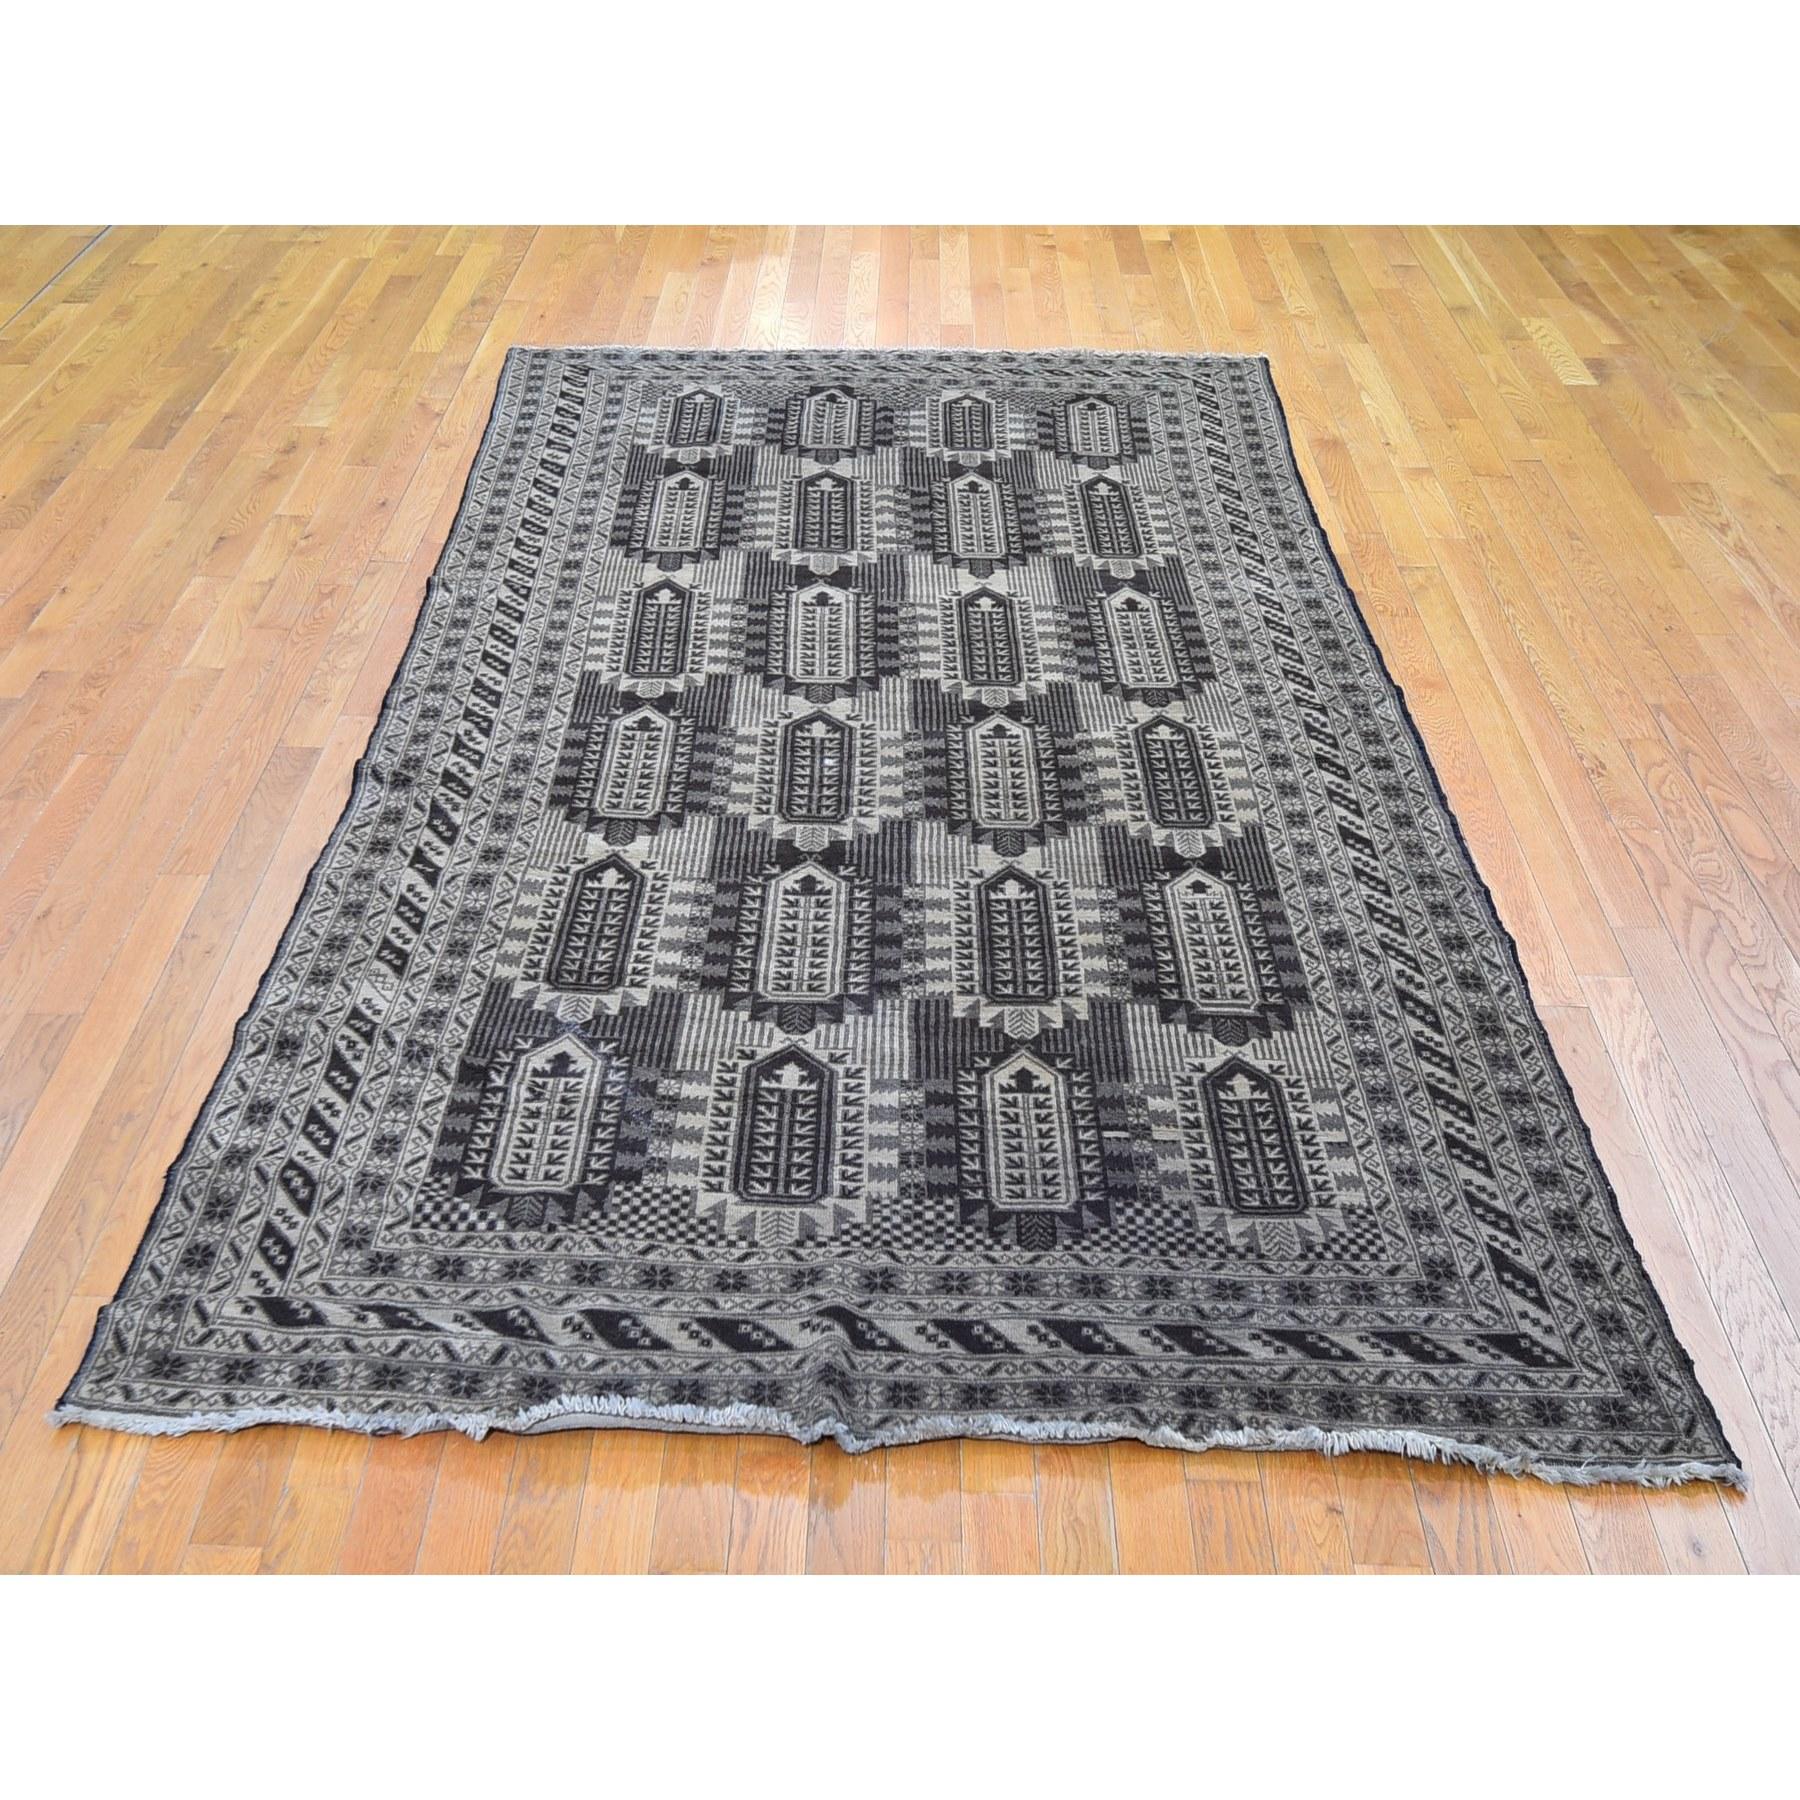 This fabulous hand-knotted carpet has been created and designed for extra strength and durability. This rug has been handcrafted for weeks in the traditional method that is used to make
Exact Rug Size in Feet and Inches : 6'0